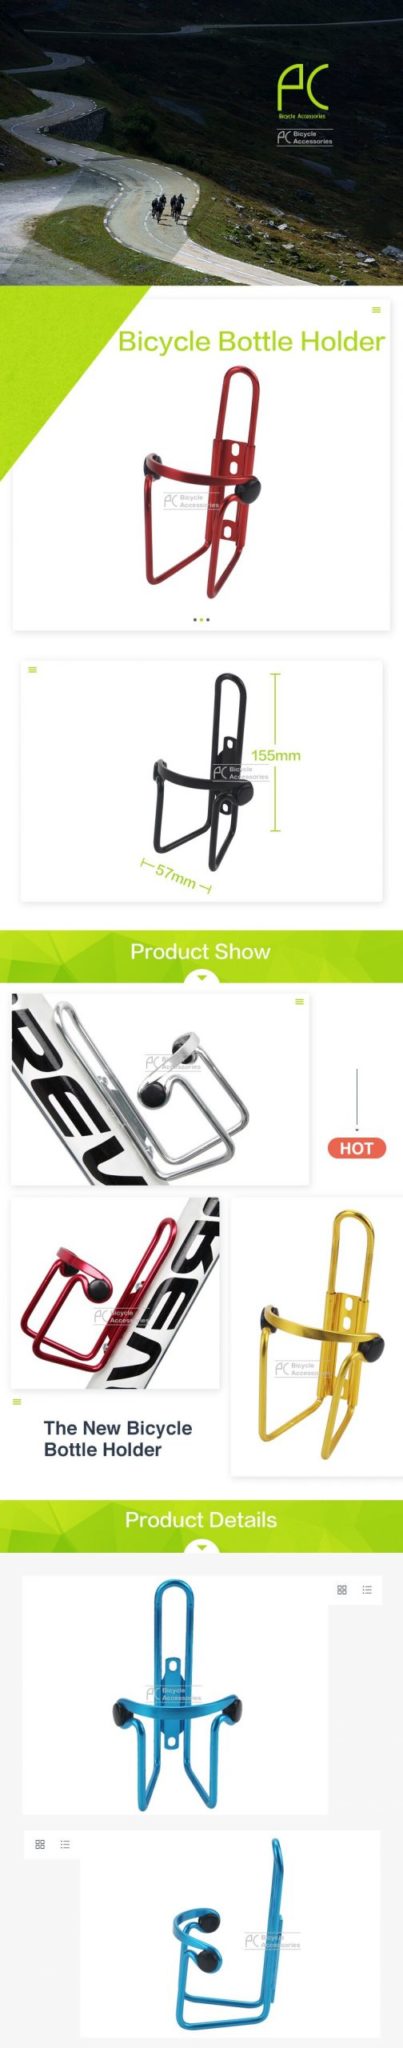 PCycling Bicycles Water Bottle Holder Bike Bottle Cages Holder Rack Useful Accessories for Sports Cycling Riding Racing